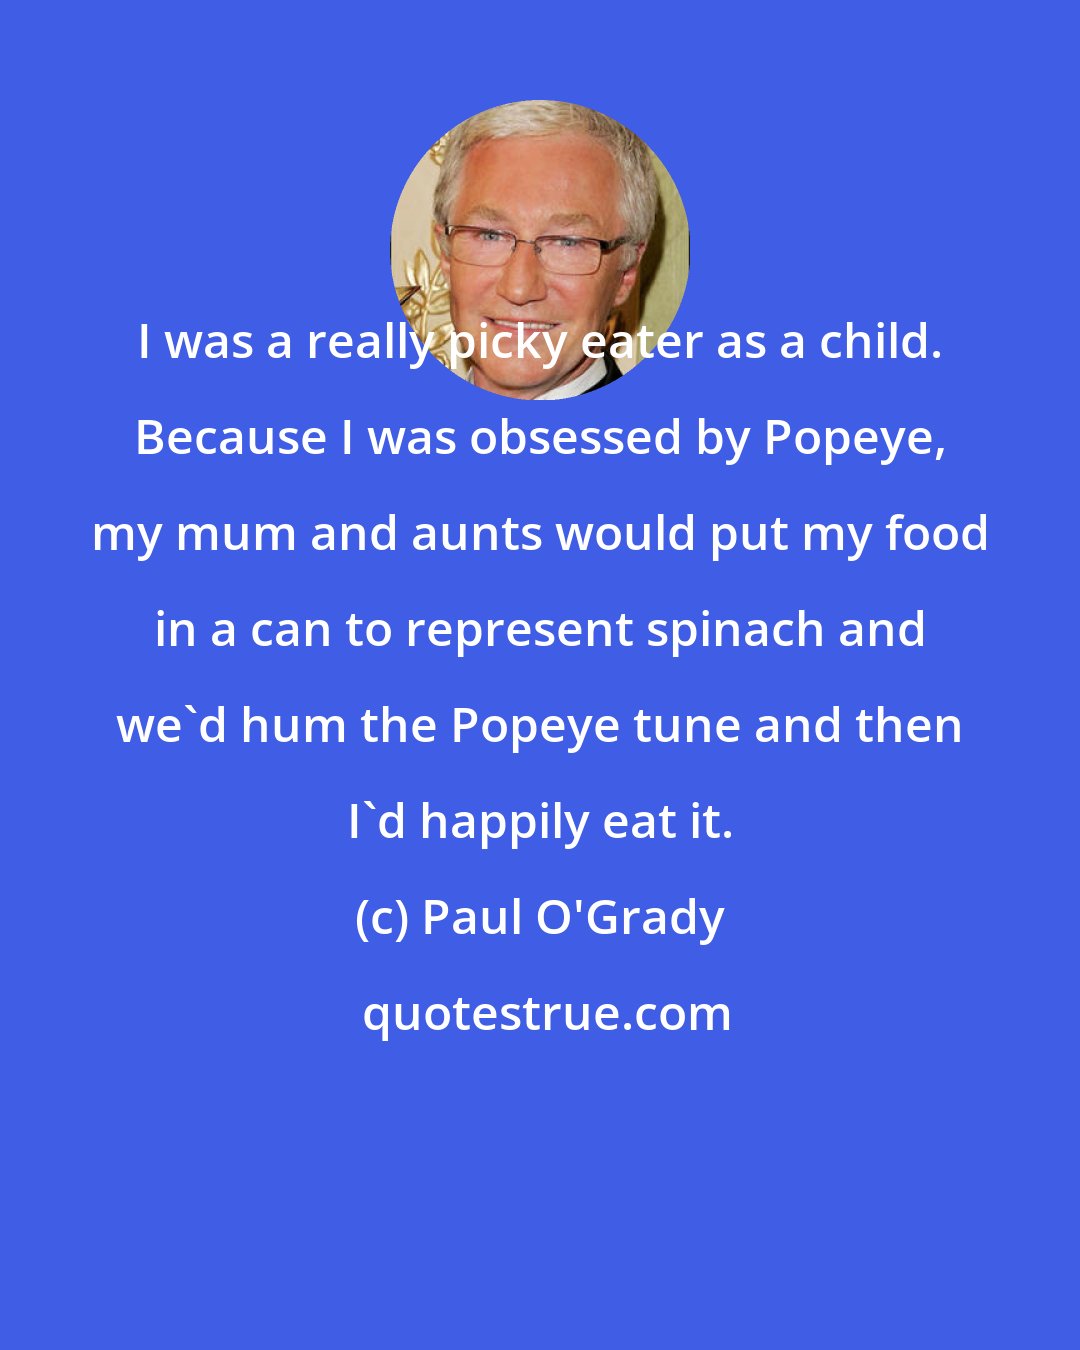 Paul O'Grady: I was a really picky eater as a child. Because I was obsessed by Popeye, my mum and aunts would put my food in a can to represent spinach and we'd hum the Popeye tune and then I'd happily eat it.